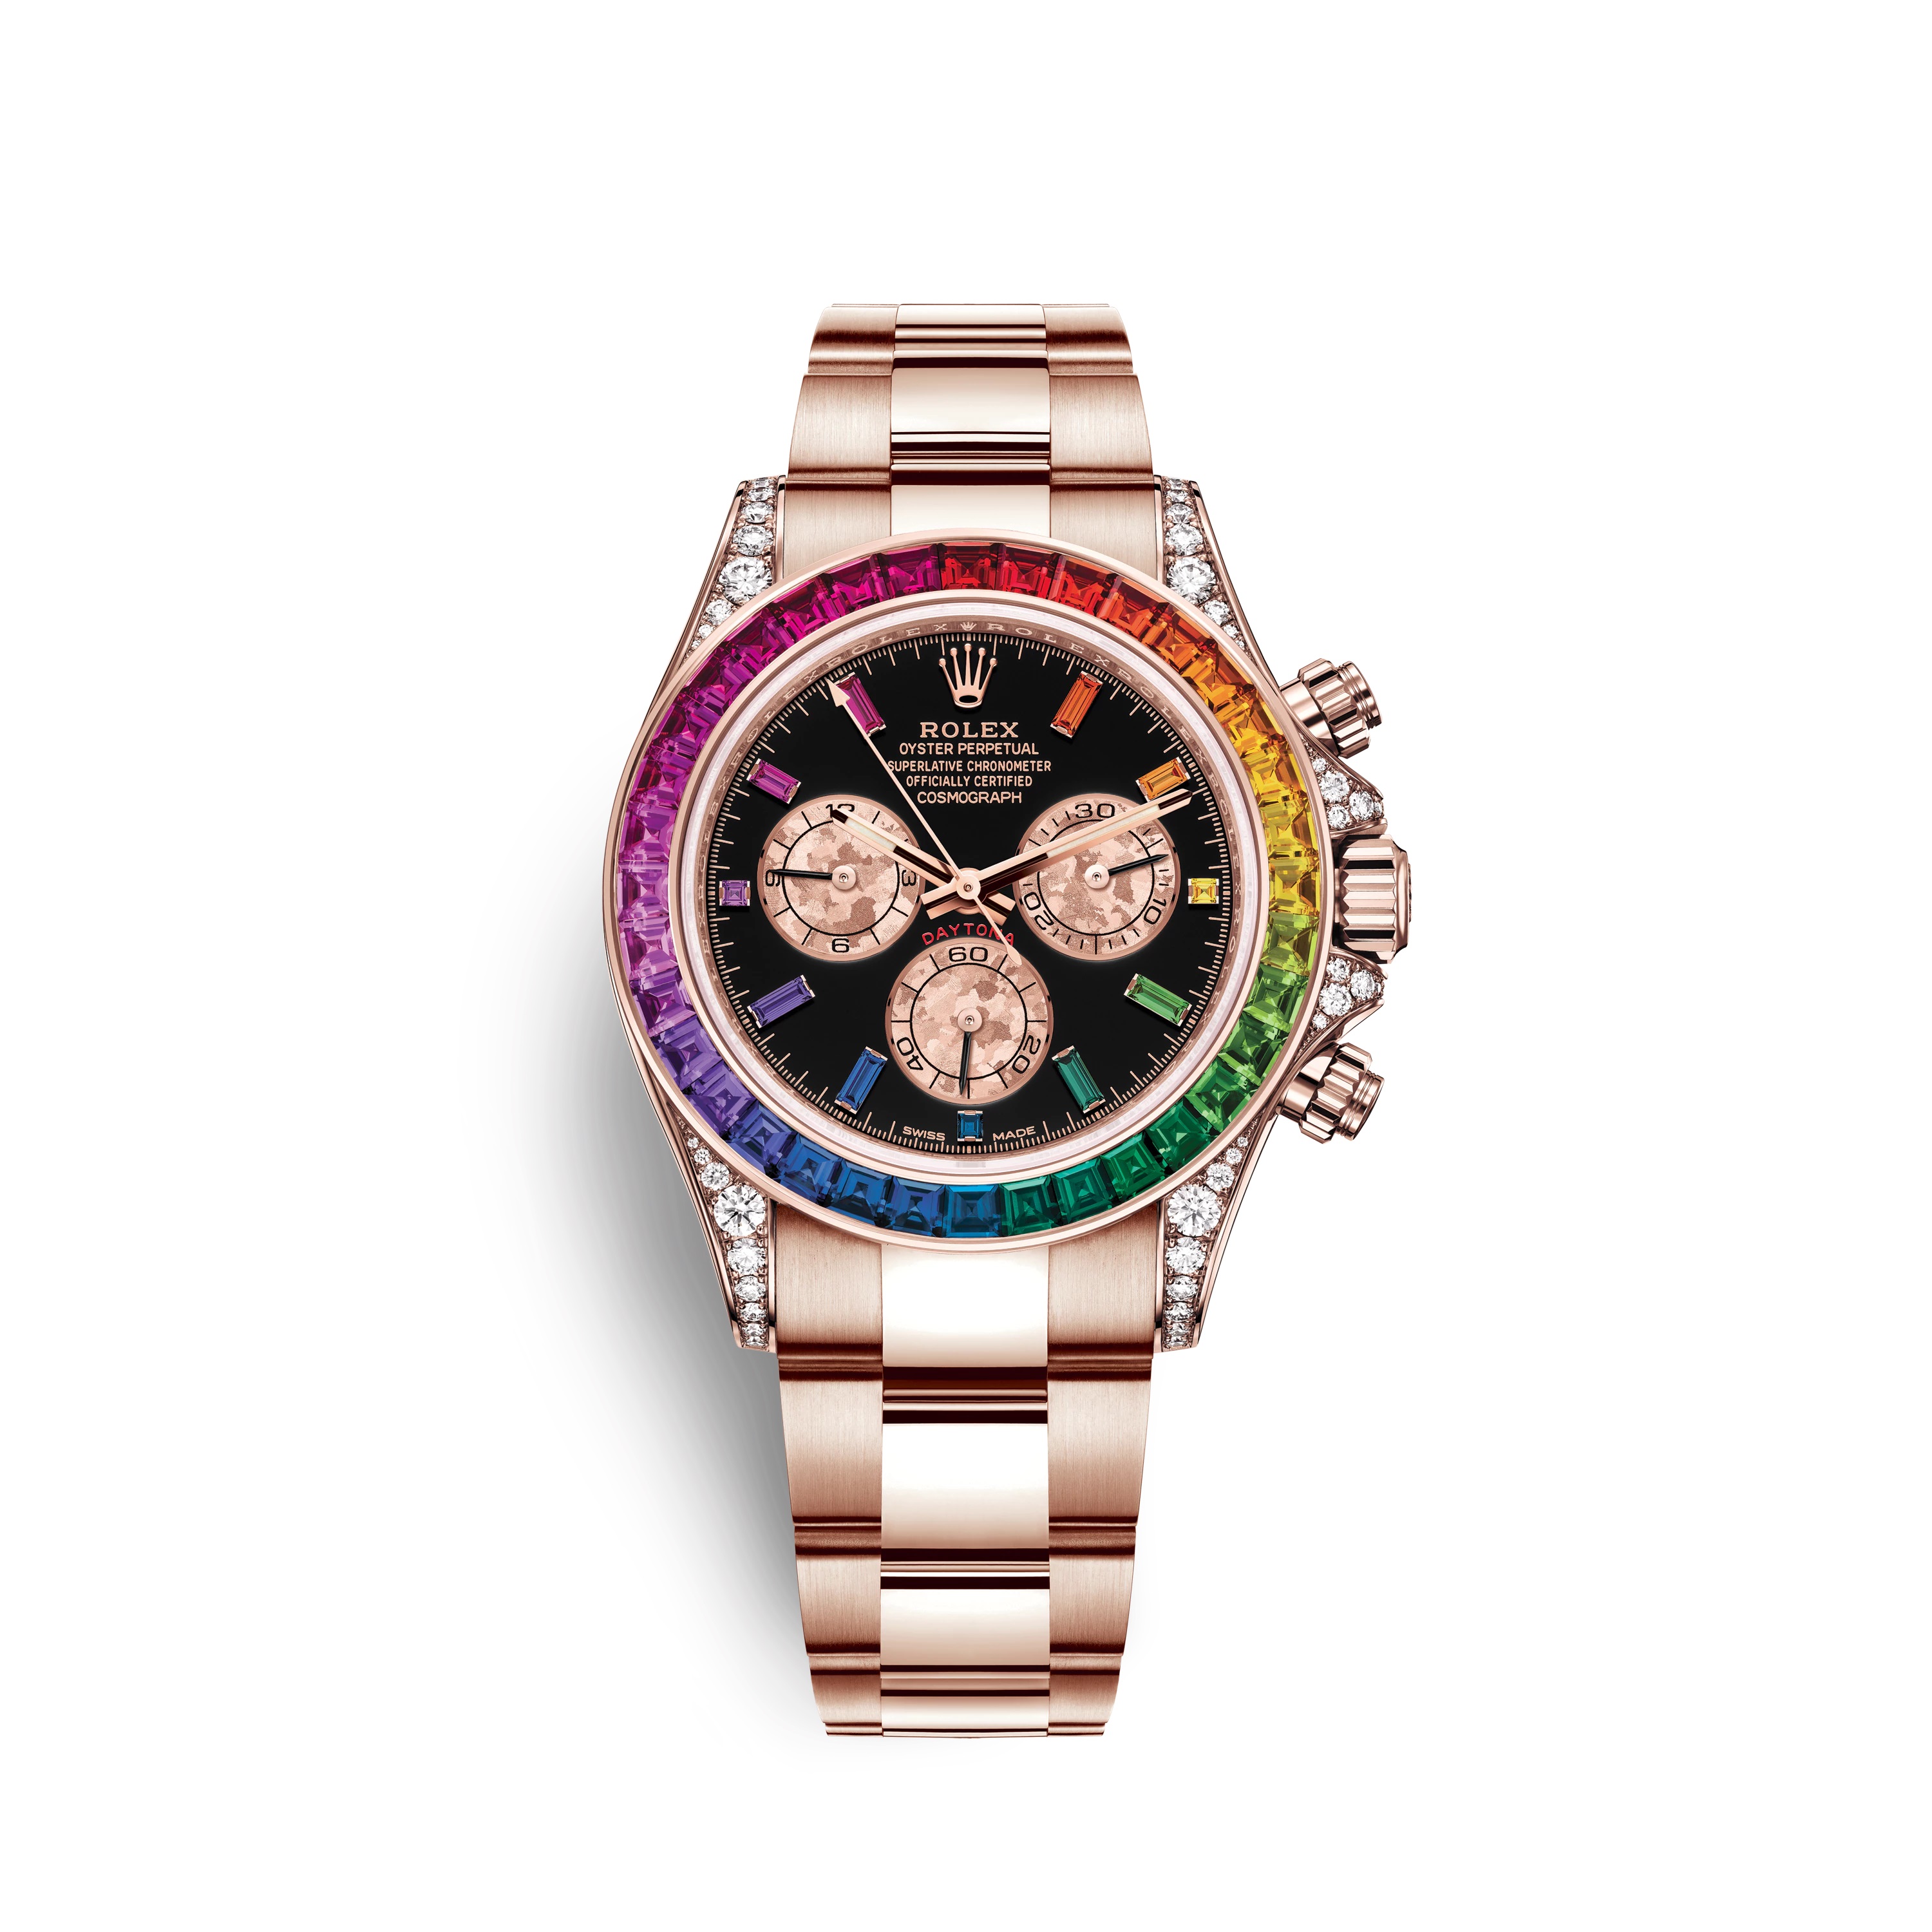 Daytona 116595RBOW Rose Gold Watch (Black and Gold Crystals Set with Sapphires)